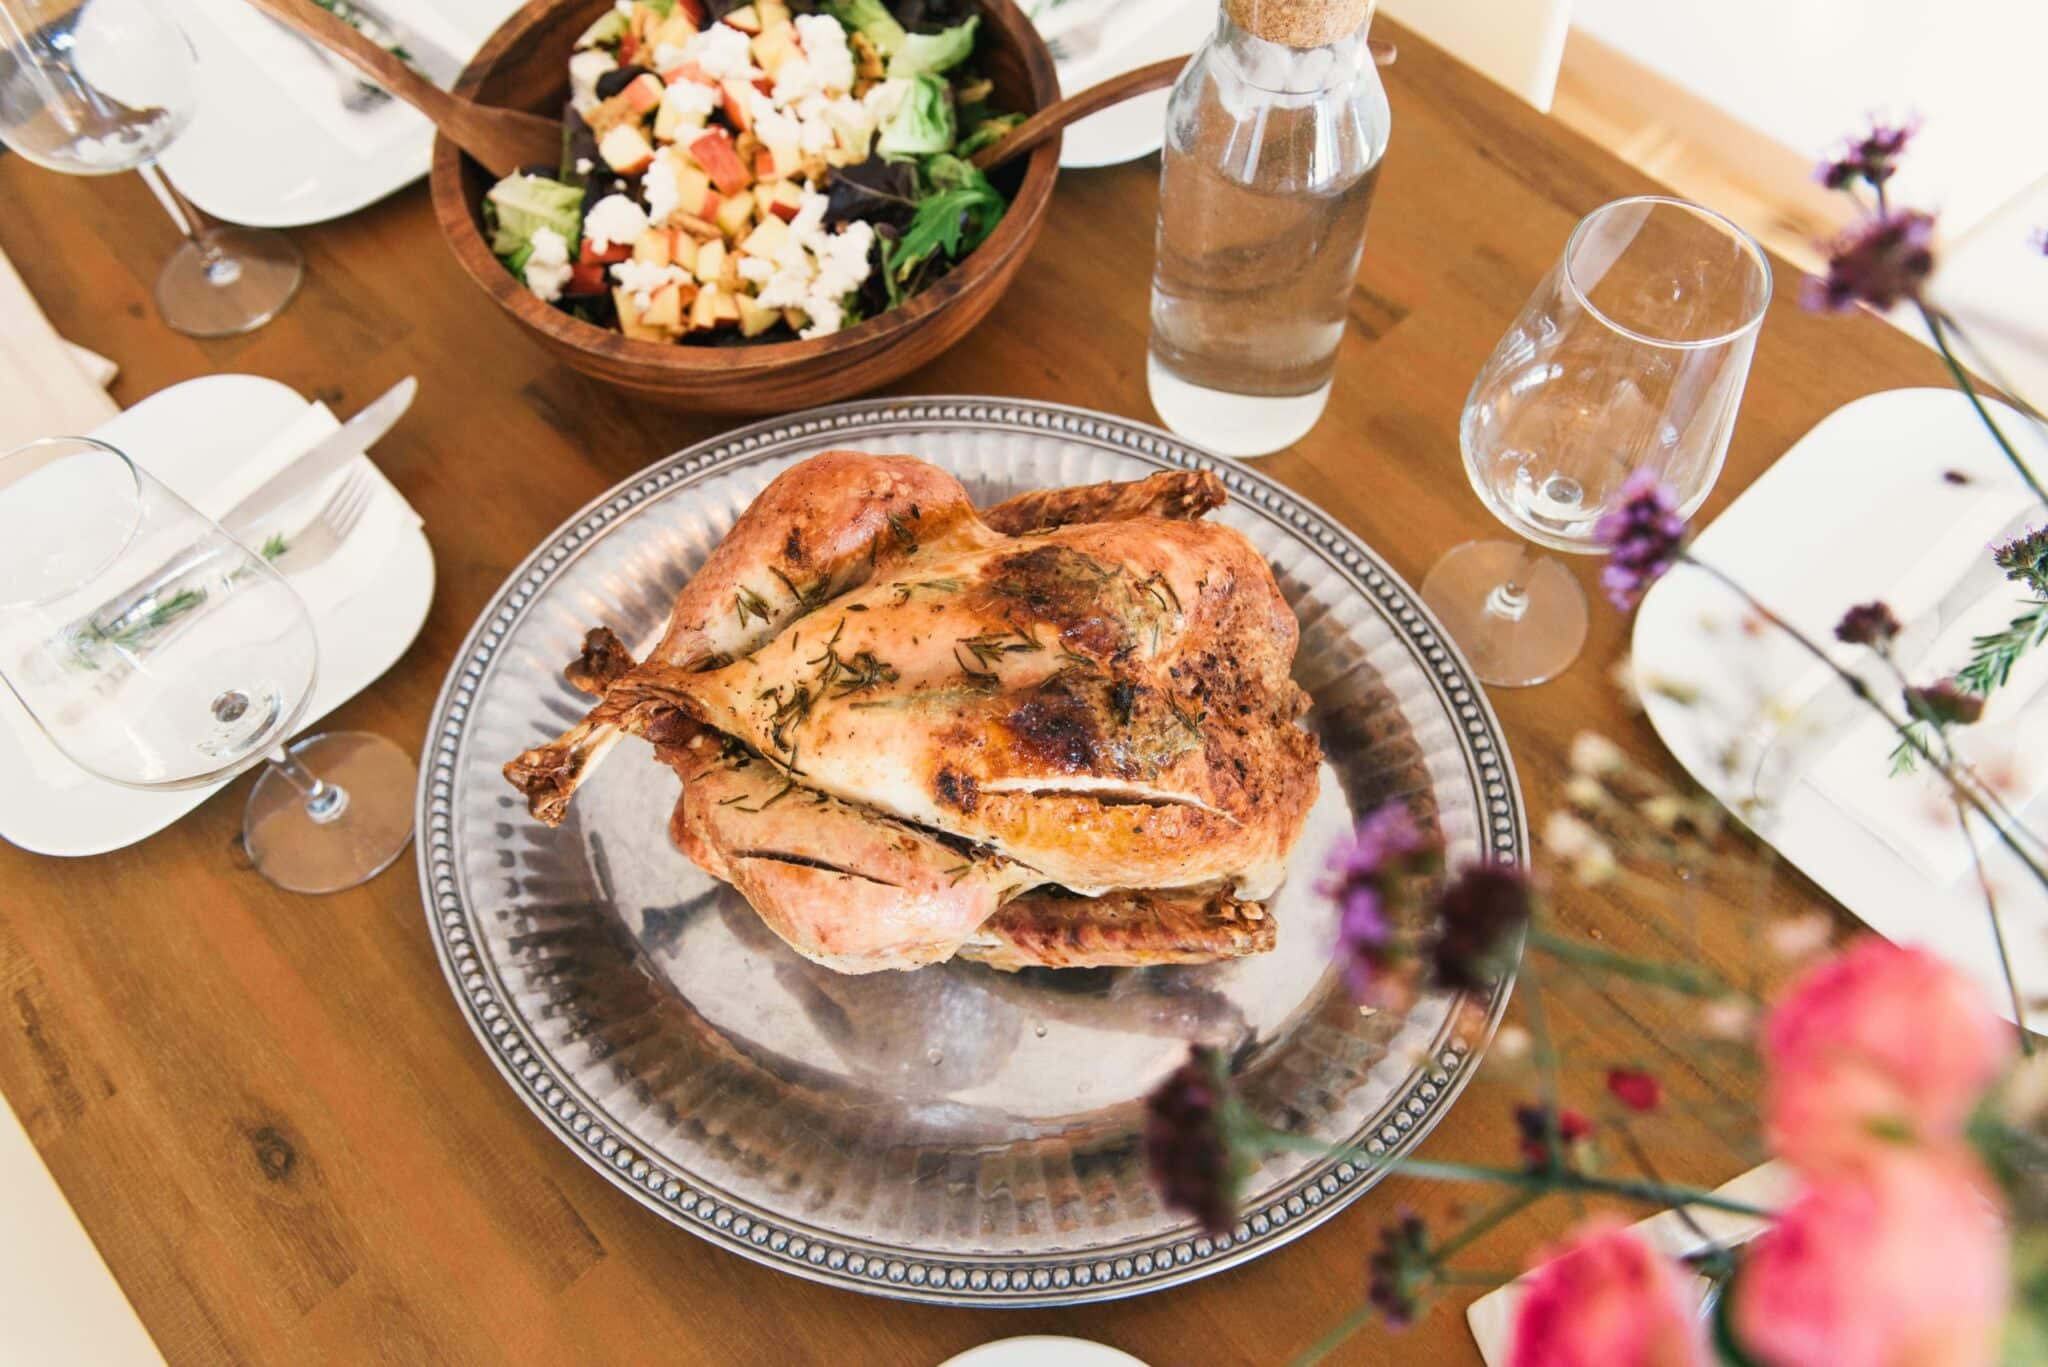 A table setting with a roasted chicken at the center and purple and pink flowers nearby.